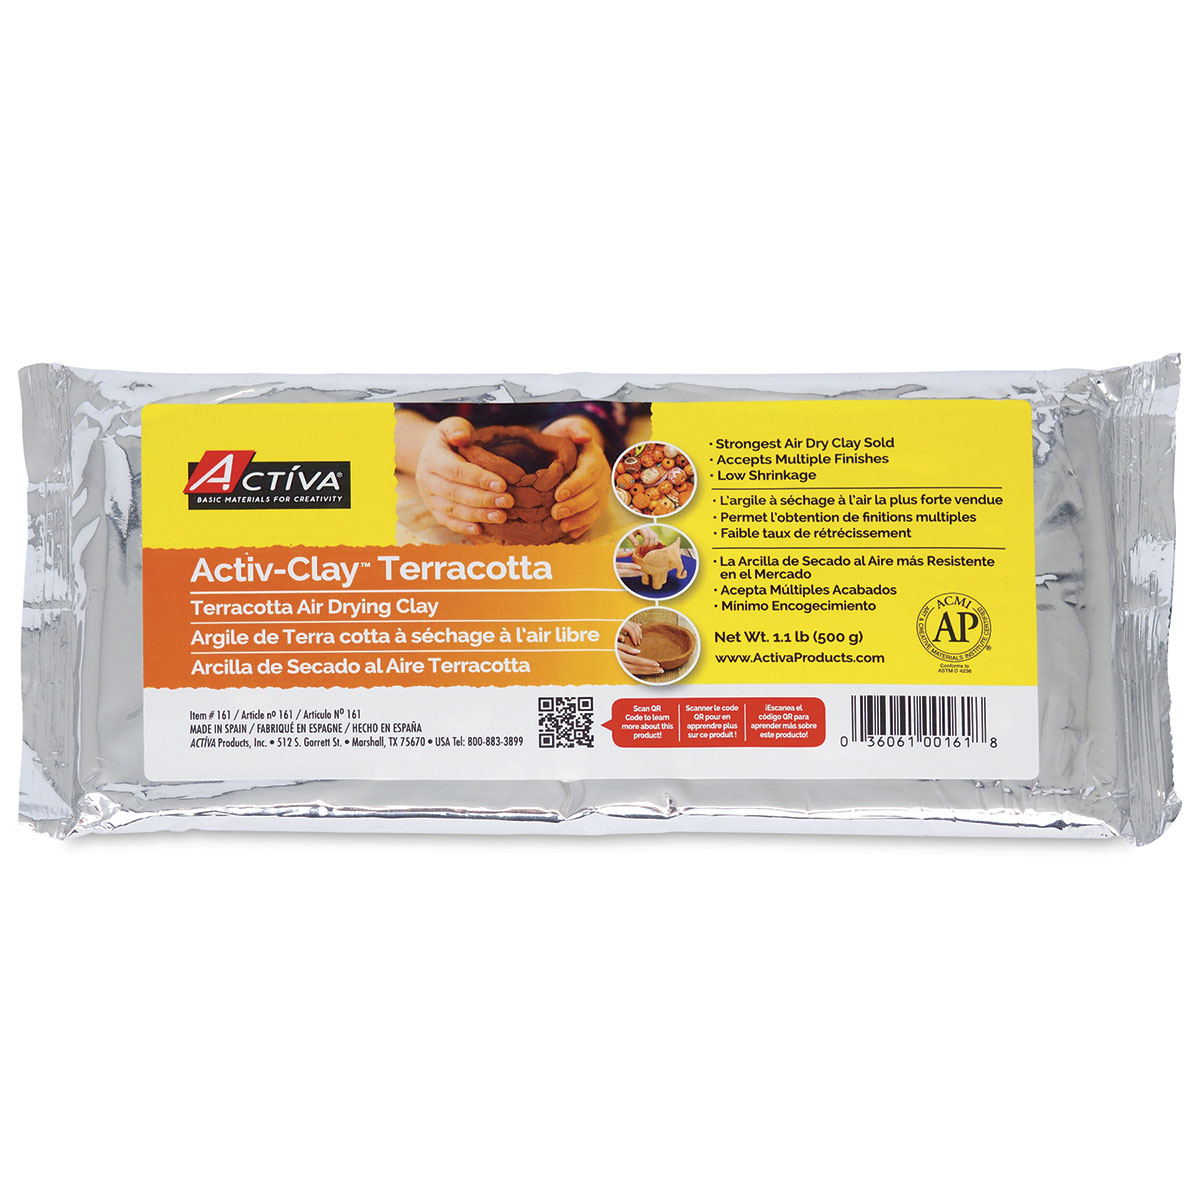 Activ-Clay Air Dry Clay, White, 3.3 lbs. API182 22.5 New